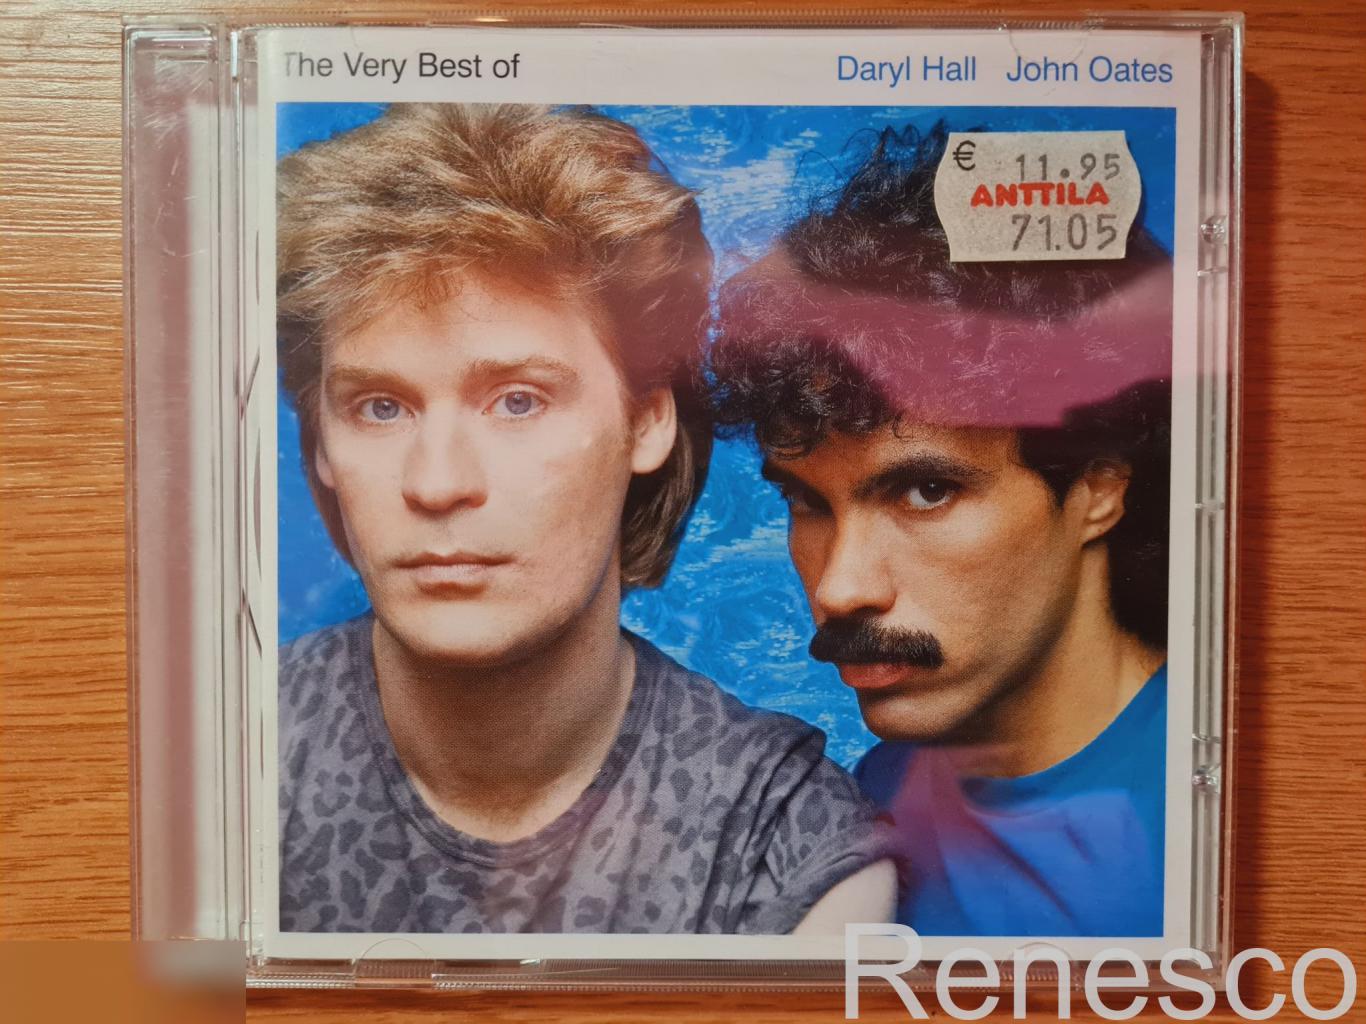 Daryl Hall John Oates ?– The Very Best Of (Europe) (Reissue)